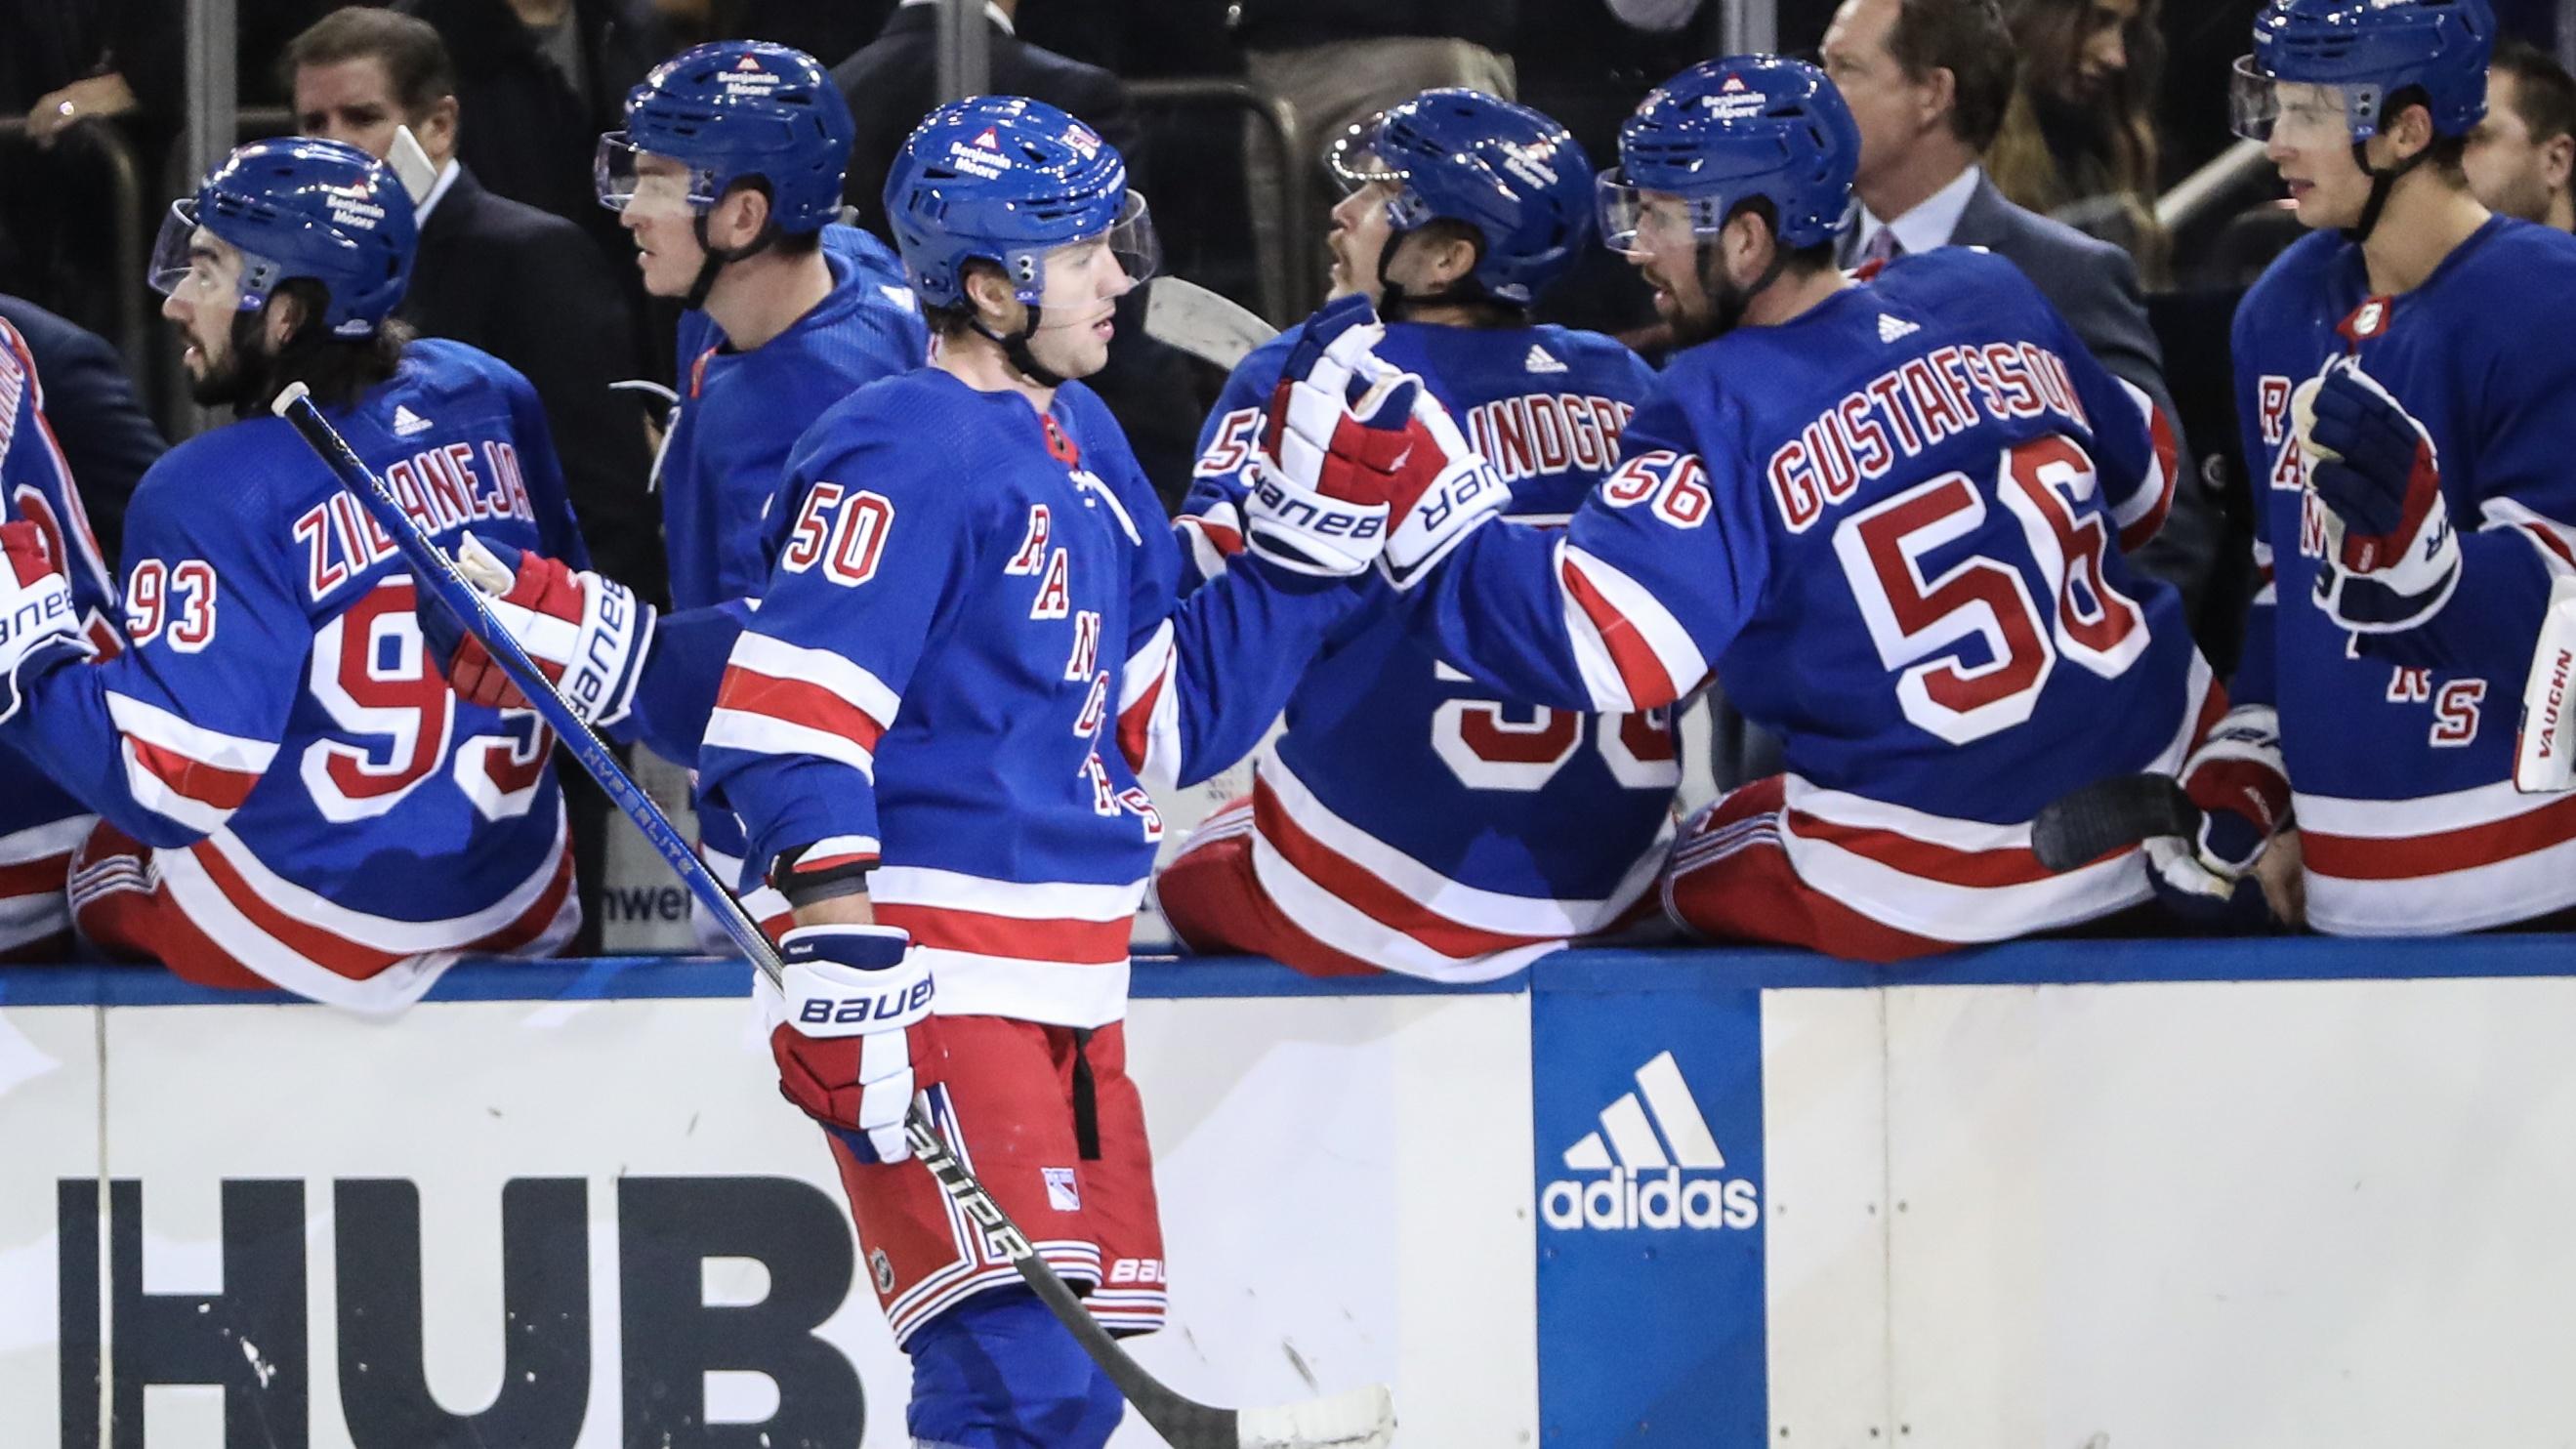 New York Rangers left wing Will Cuylle (50) celebrates with his teammates after scoring a goal in the third period against the Carolina Hurricanes at Madison Square Garden / Wendell Cruz - USA TODAY Sports